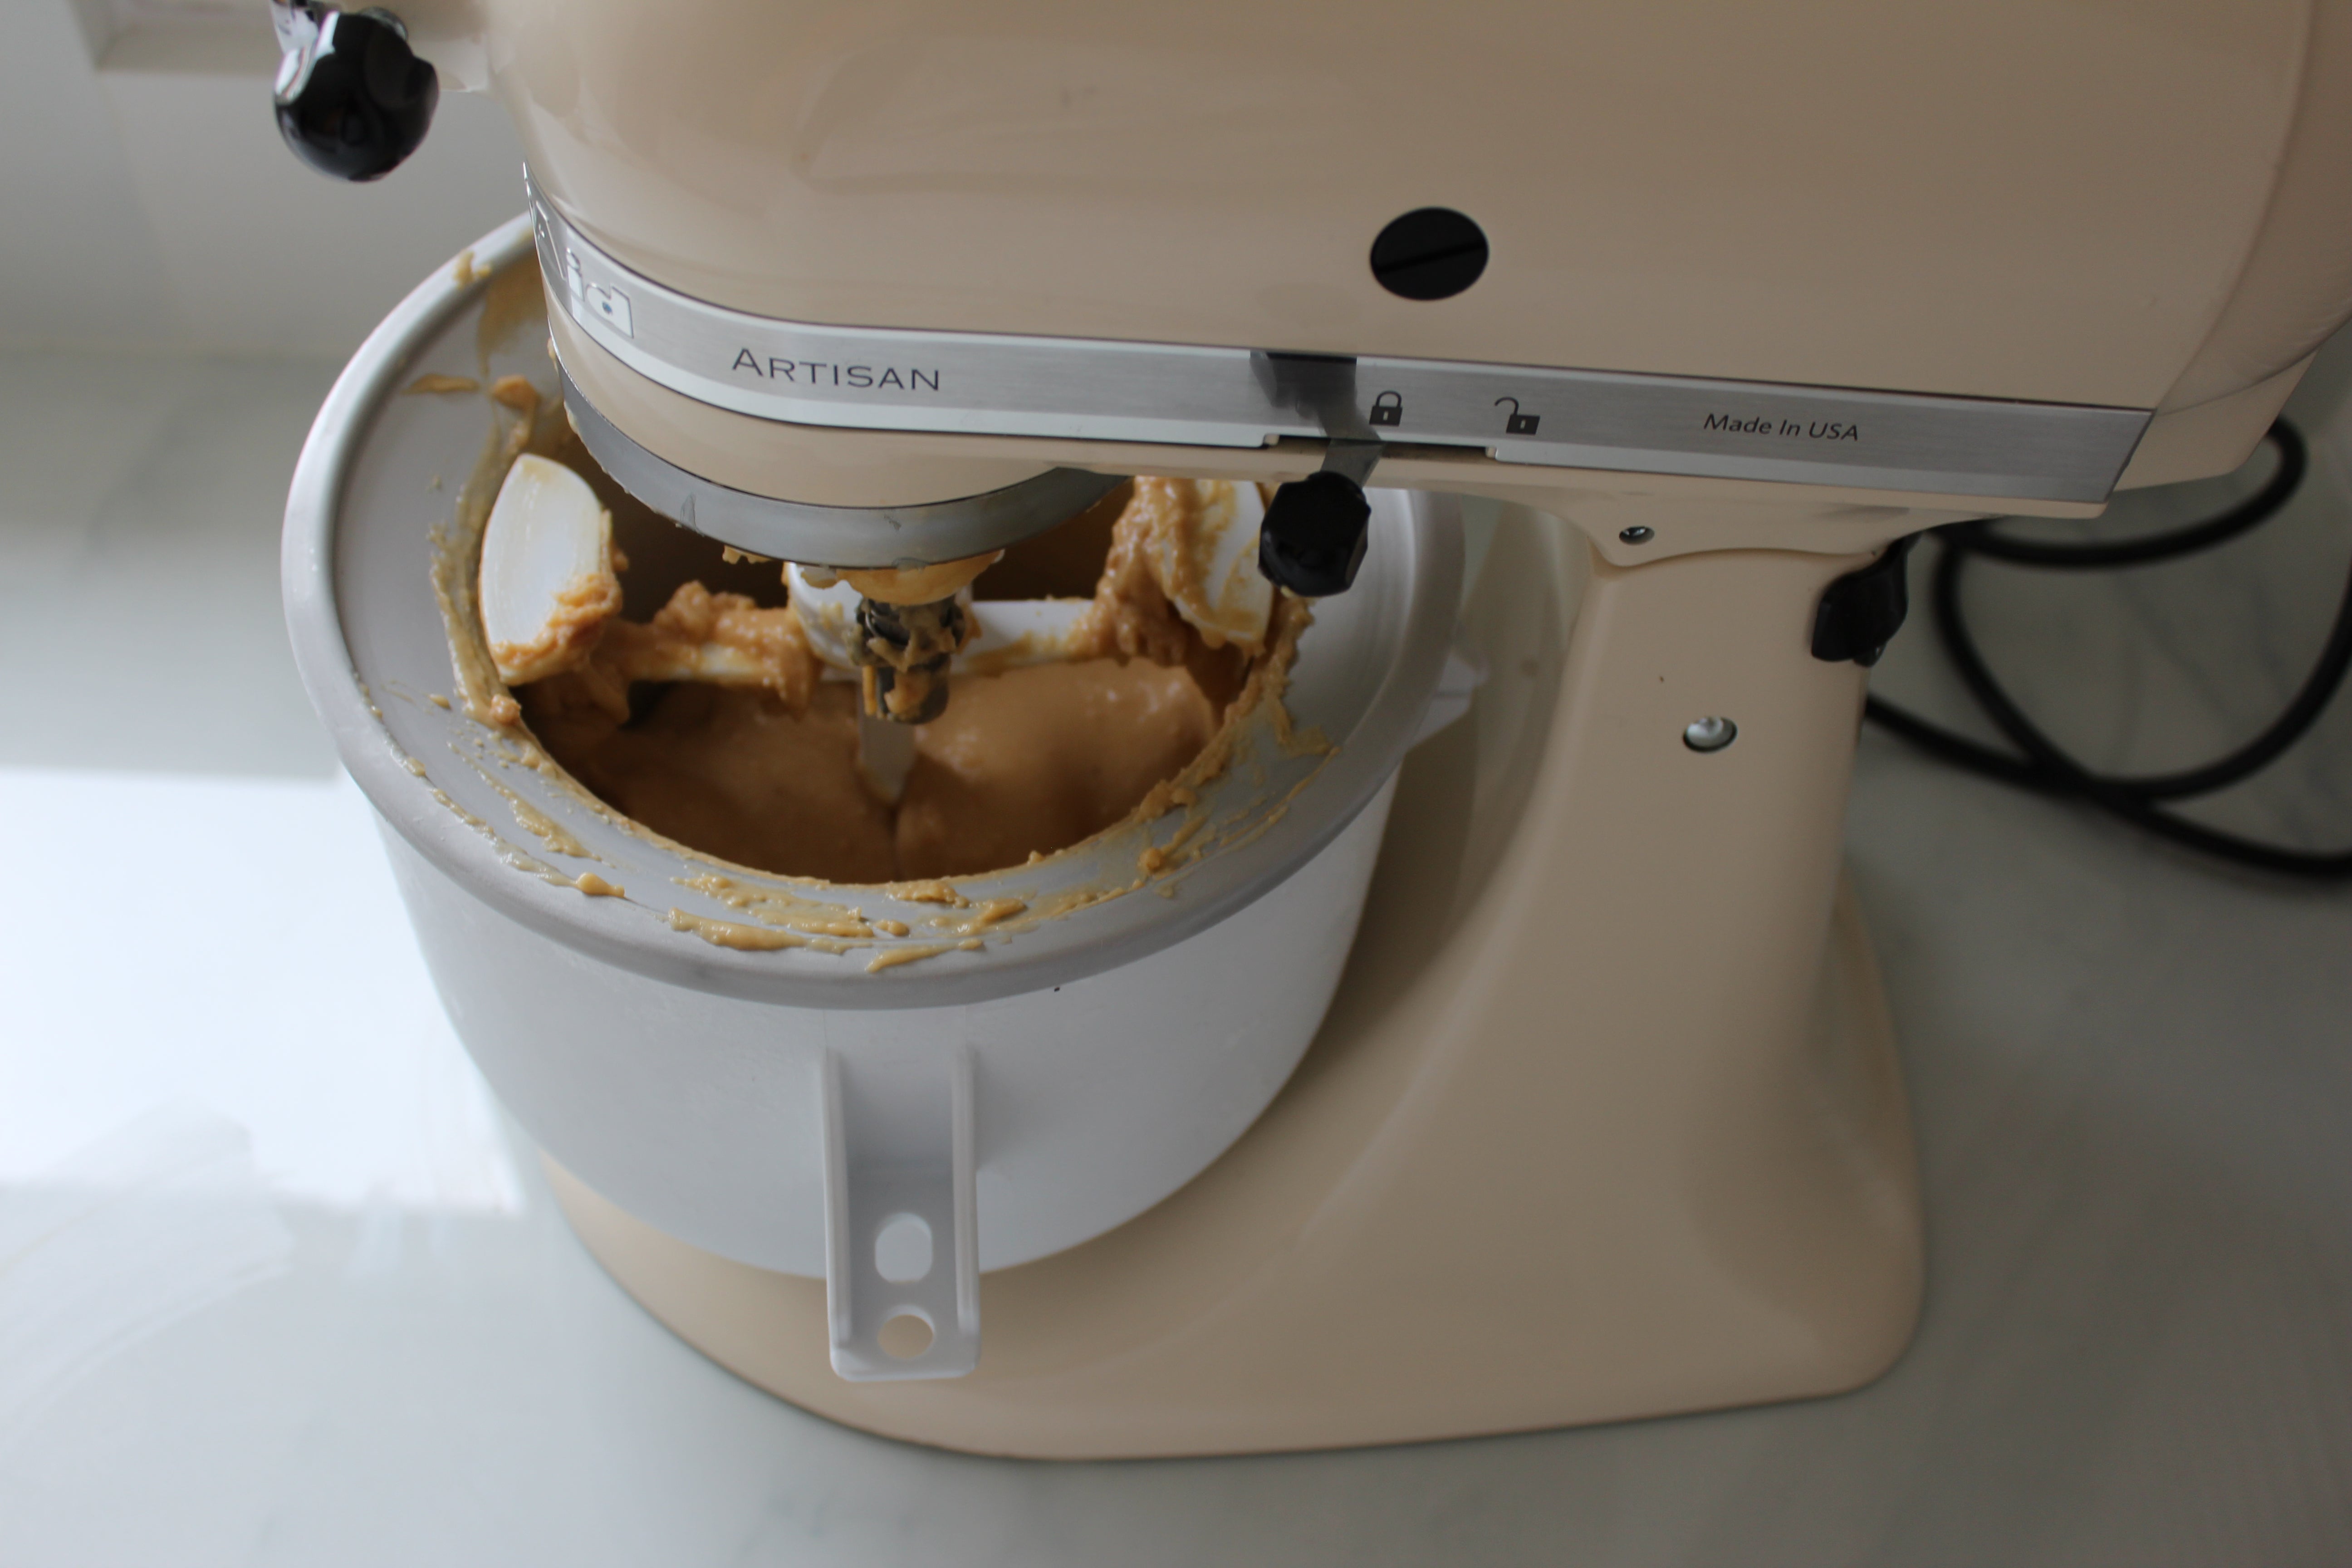 KitchenAid stand mixer with ice cream maker attachment in use.